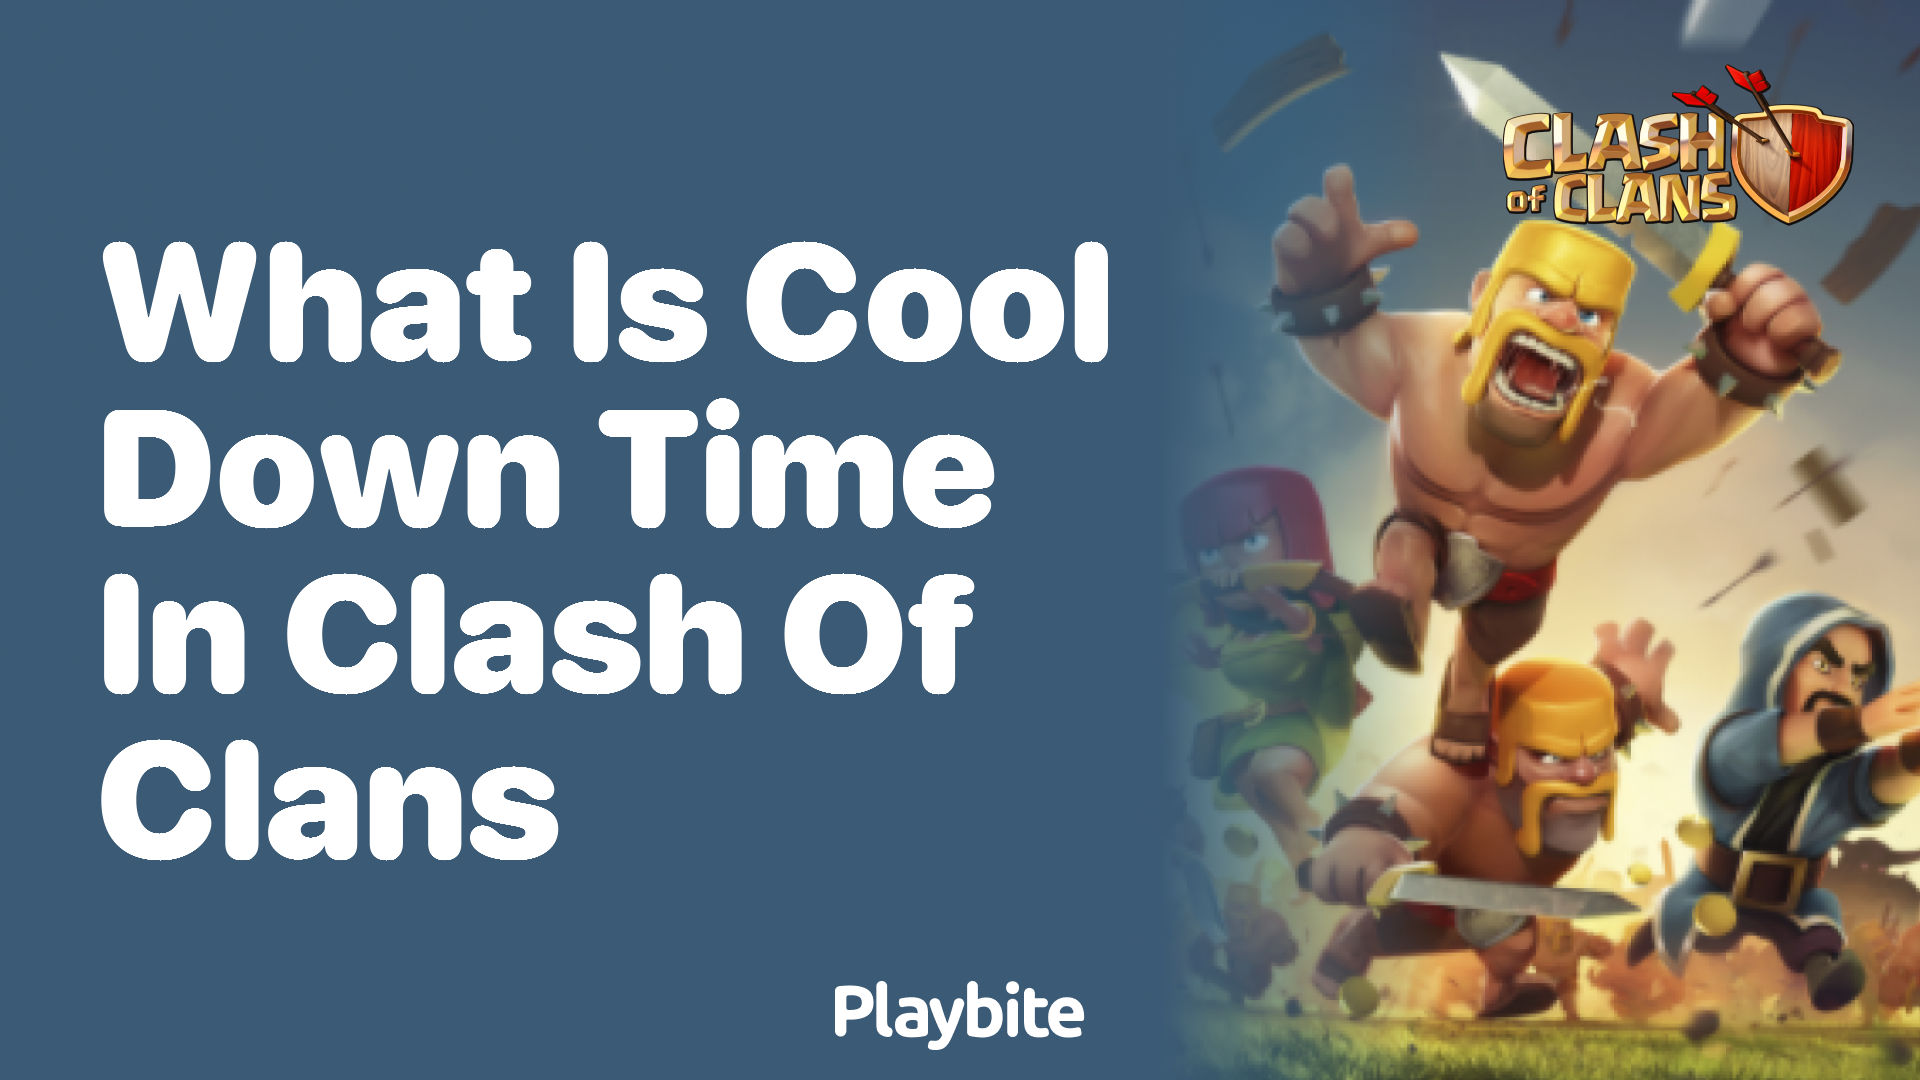 What is Cool Down Time in Clash of Clans?